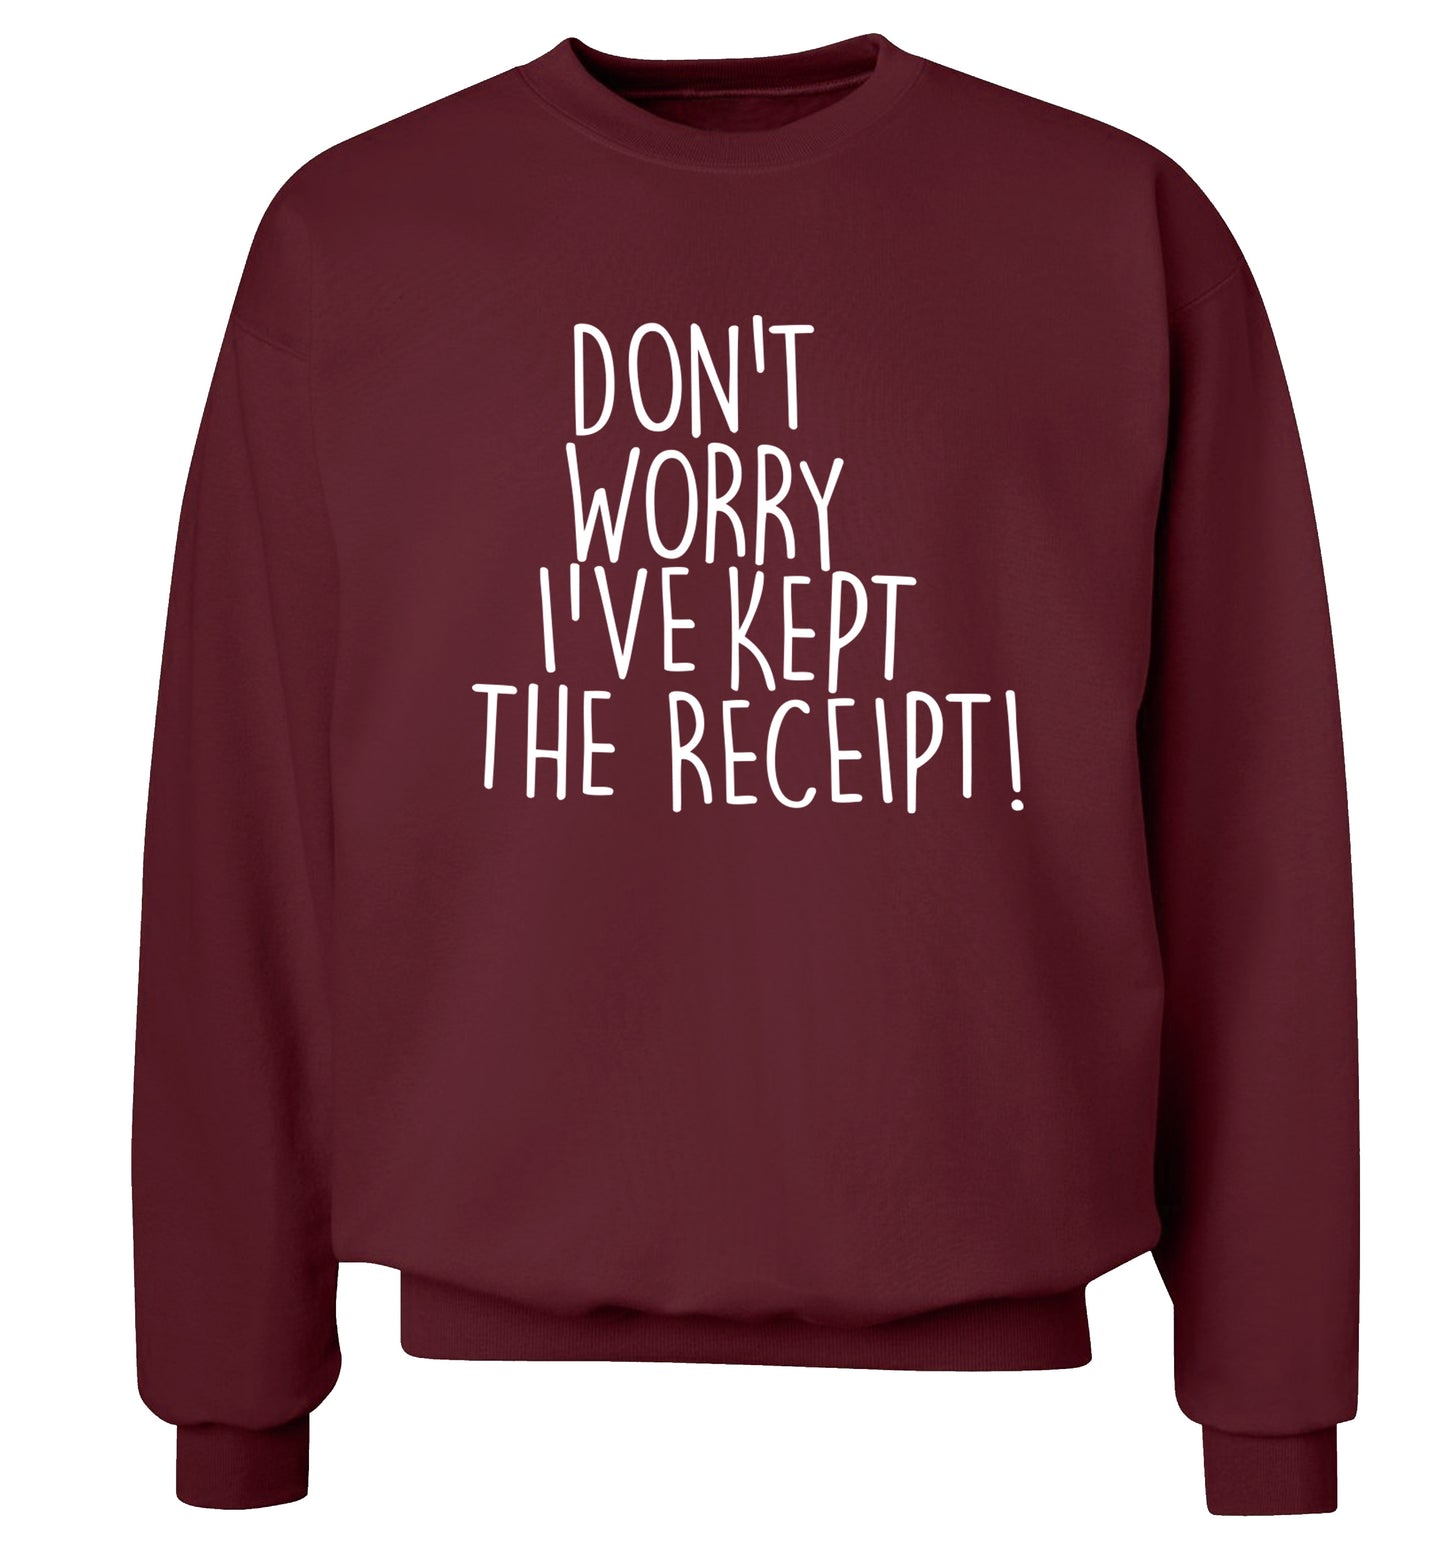 Don't Worry I've Kept the Receipt Adult's unisex maroon Sweater 2XL